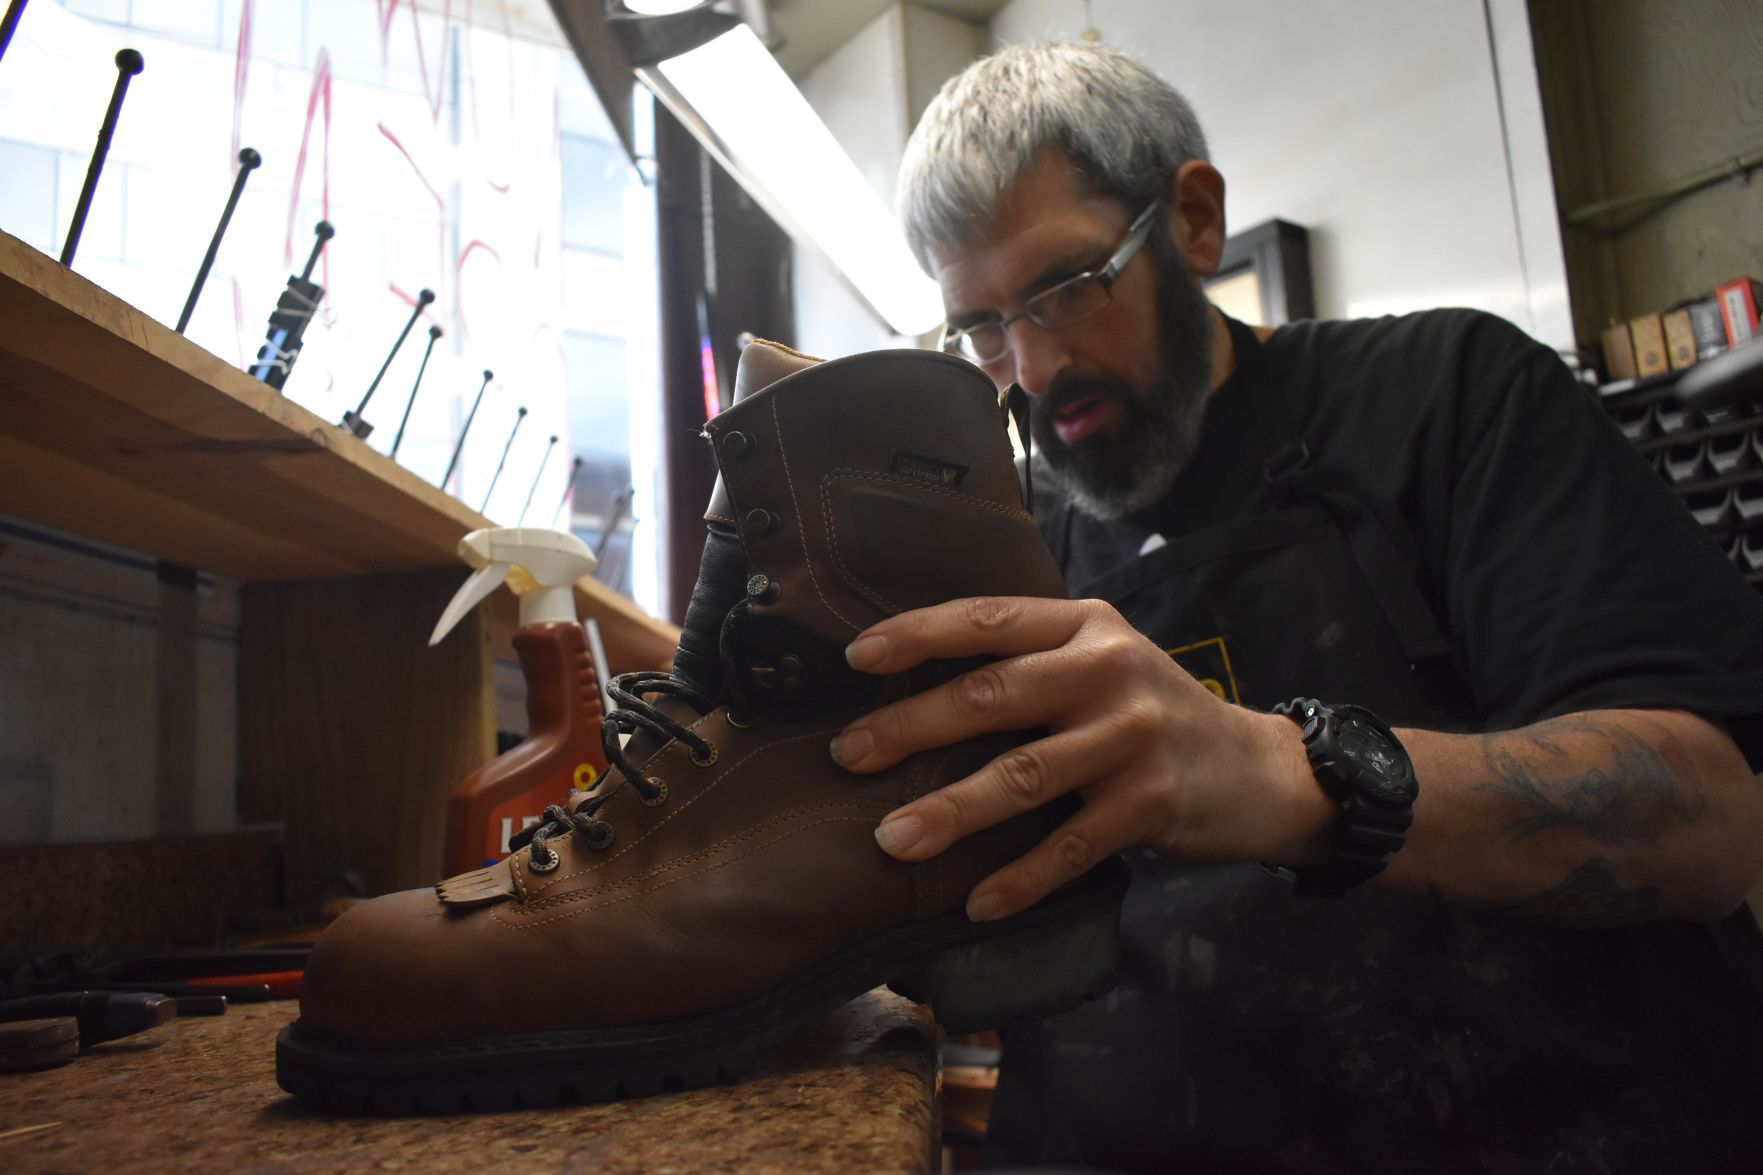 Couple revives 101-year-old shoe repair 